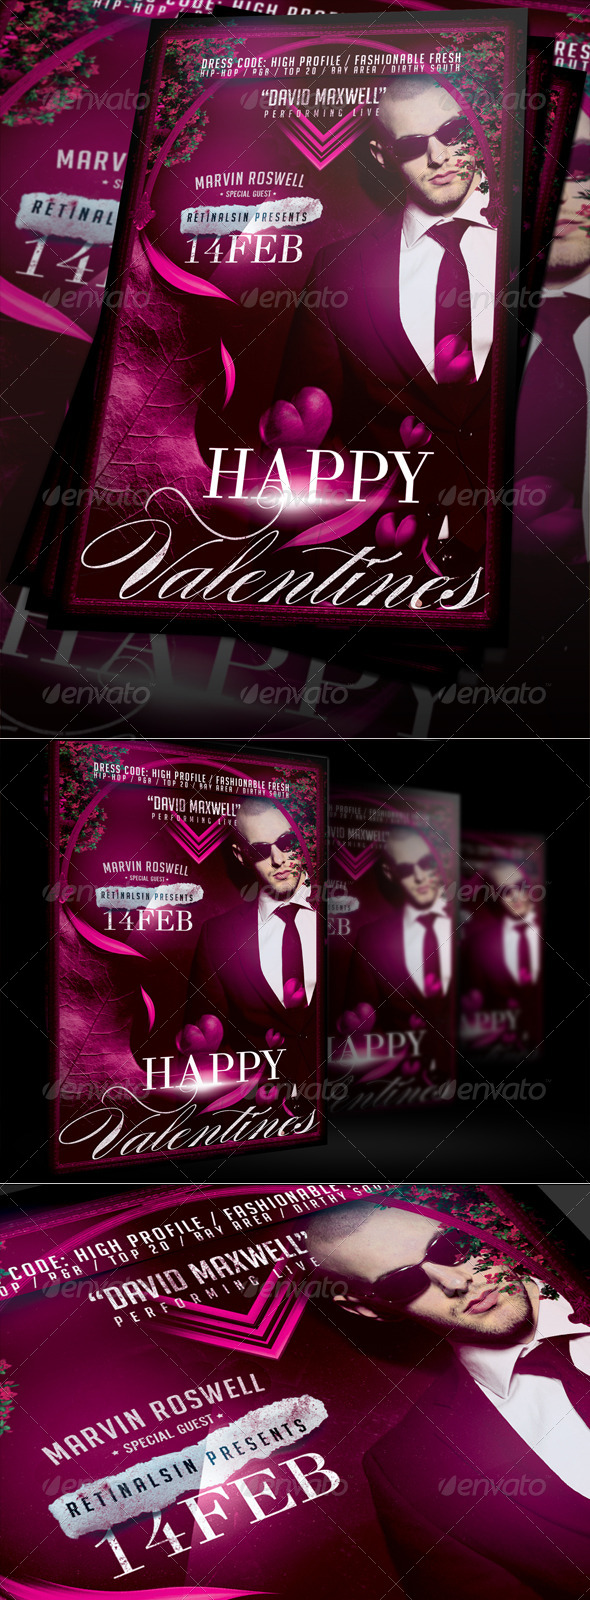 Happy Valentines Party Flyer Template